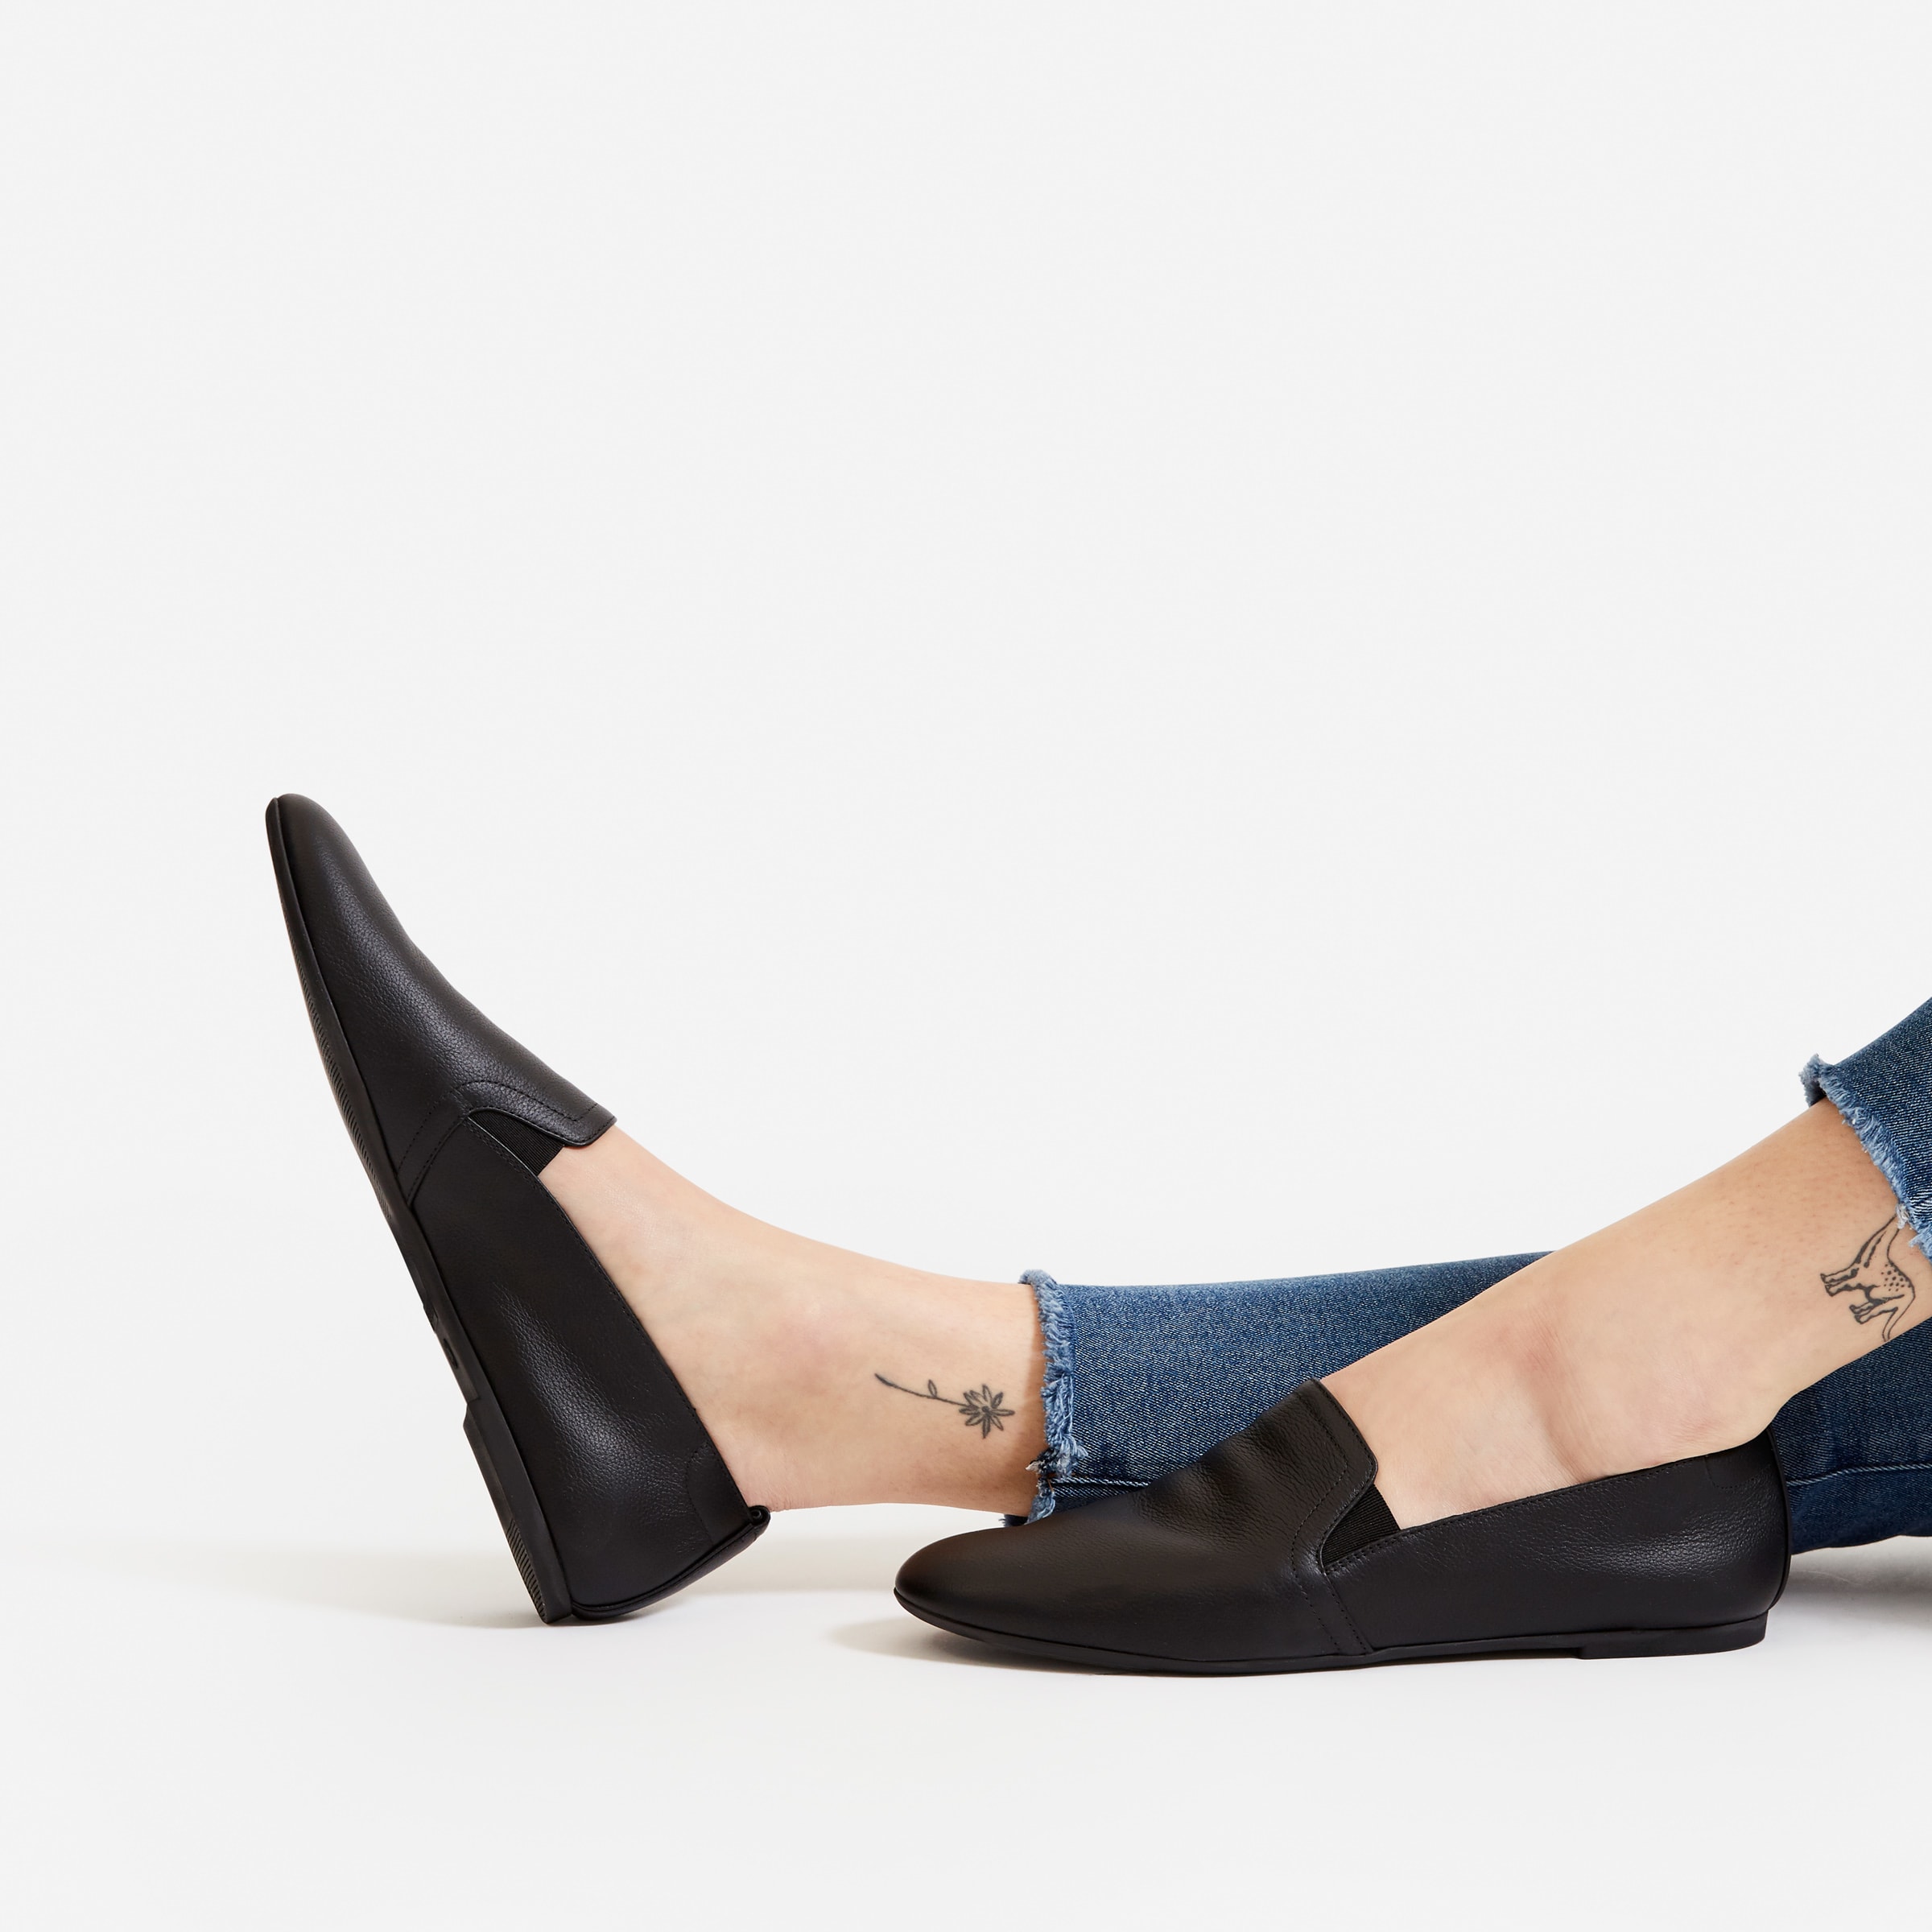 everlane leather shoes